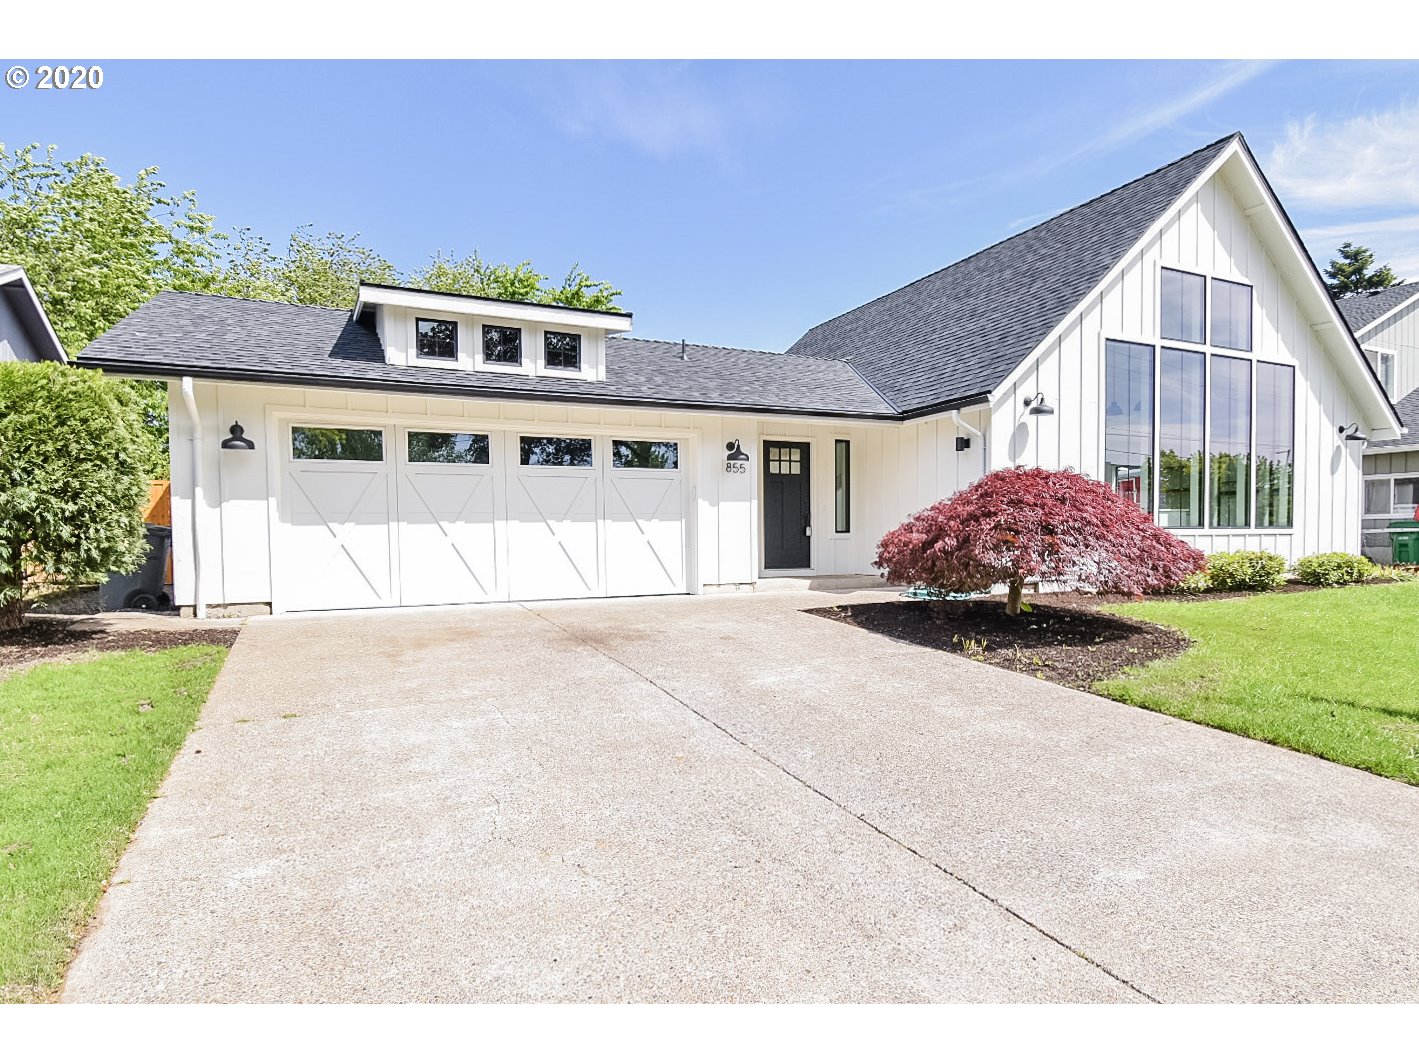 855 CALVIN ST Eugene Home Listings - Galand Haas Real Estate